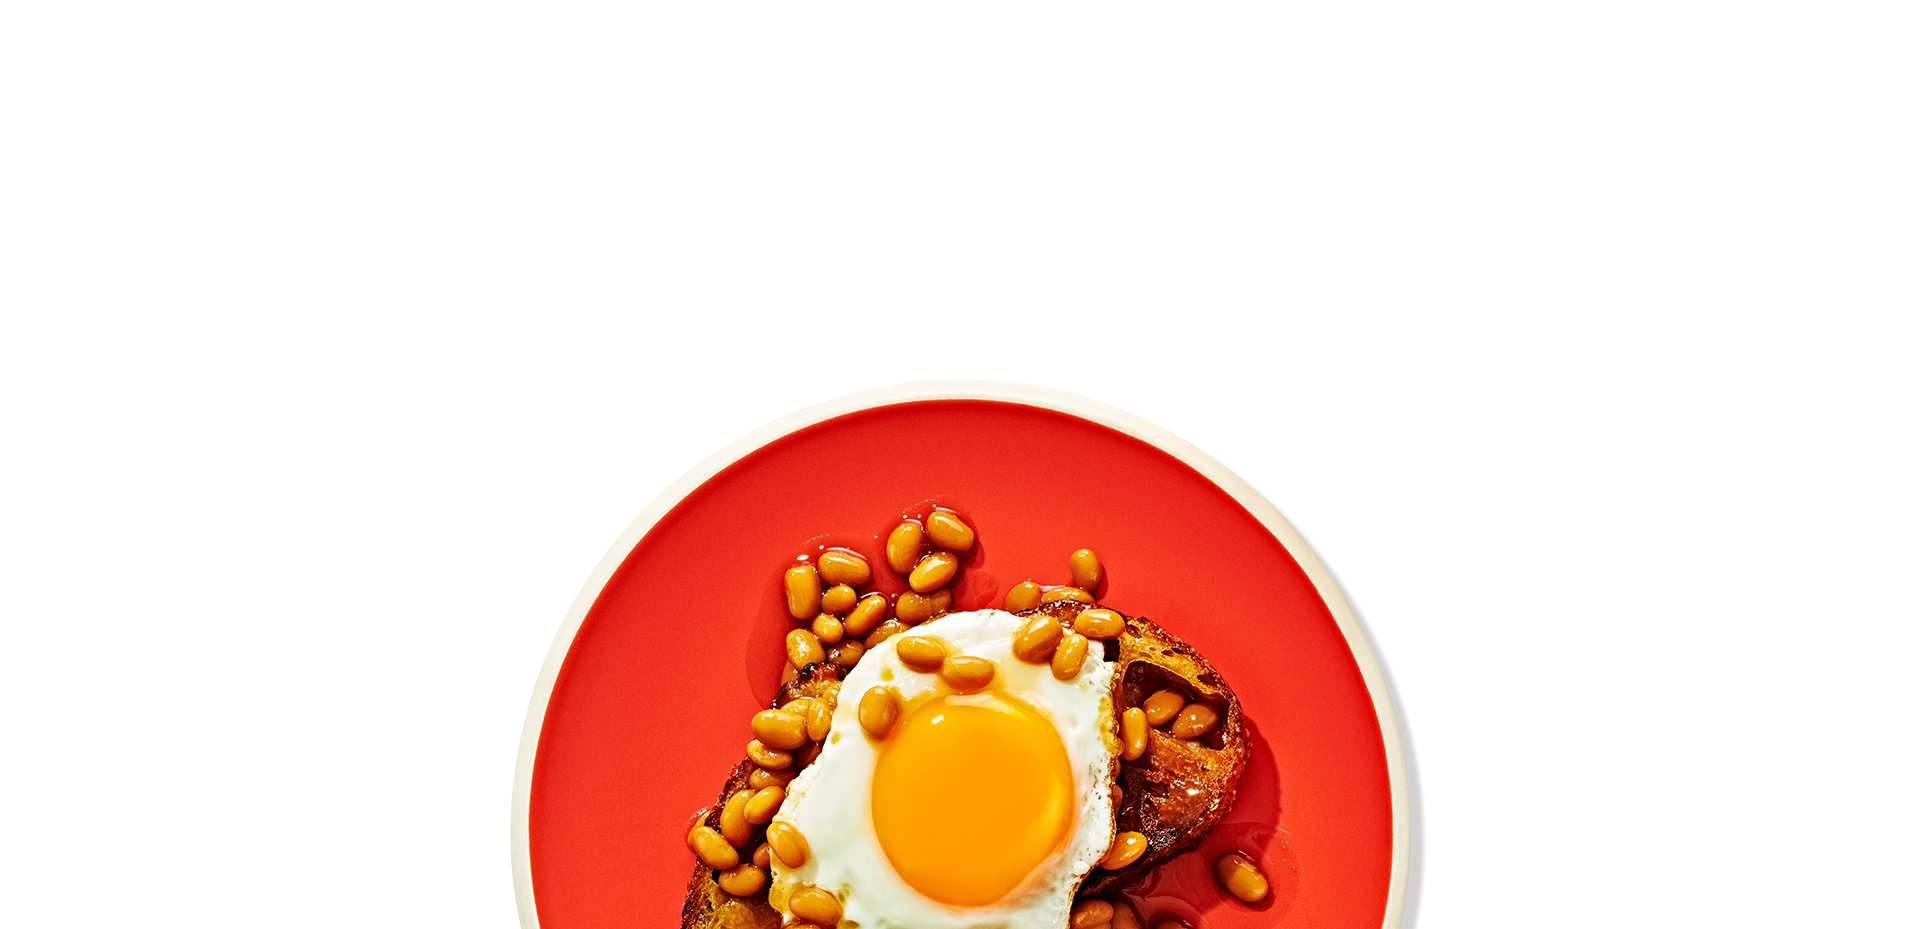 Red plate with an egg and brown beans on it